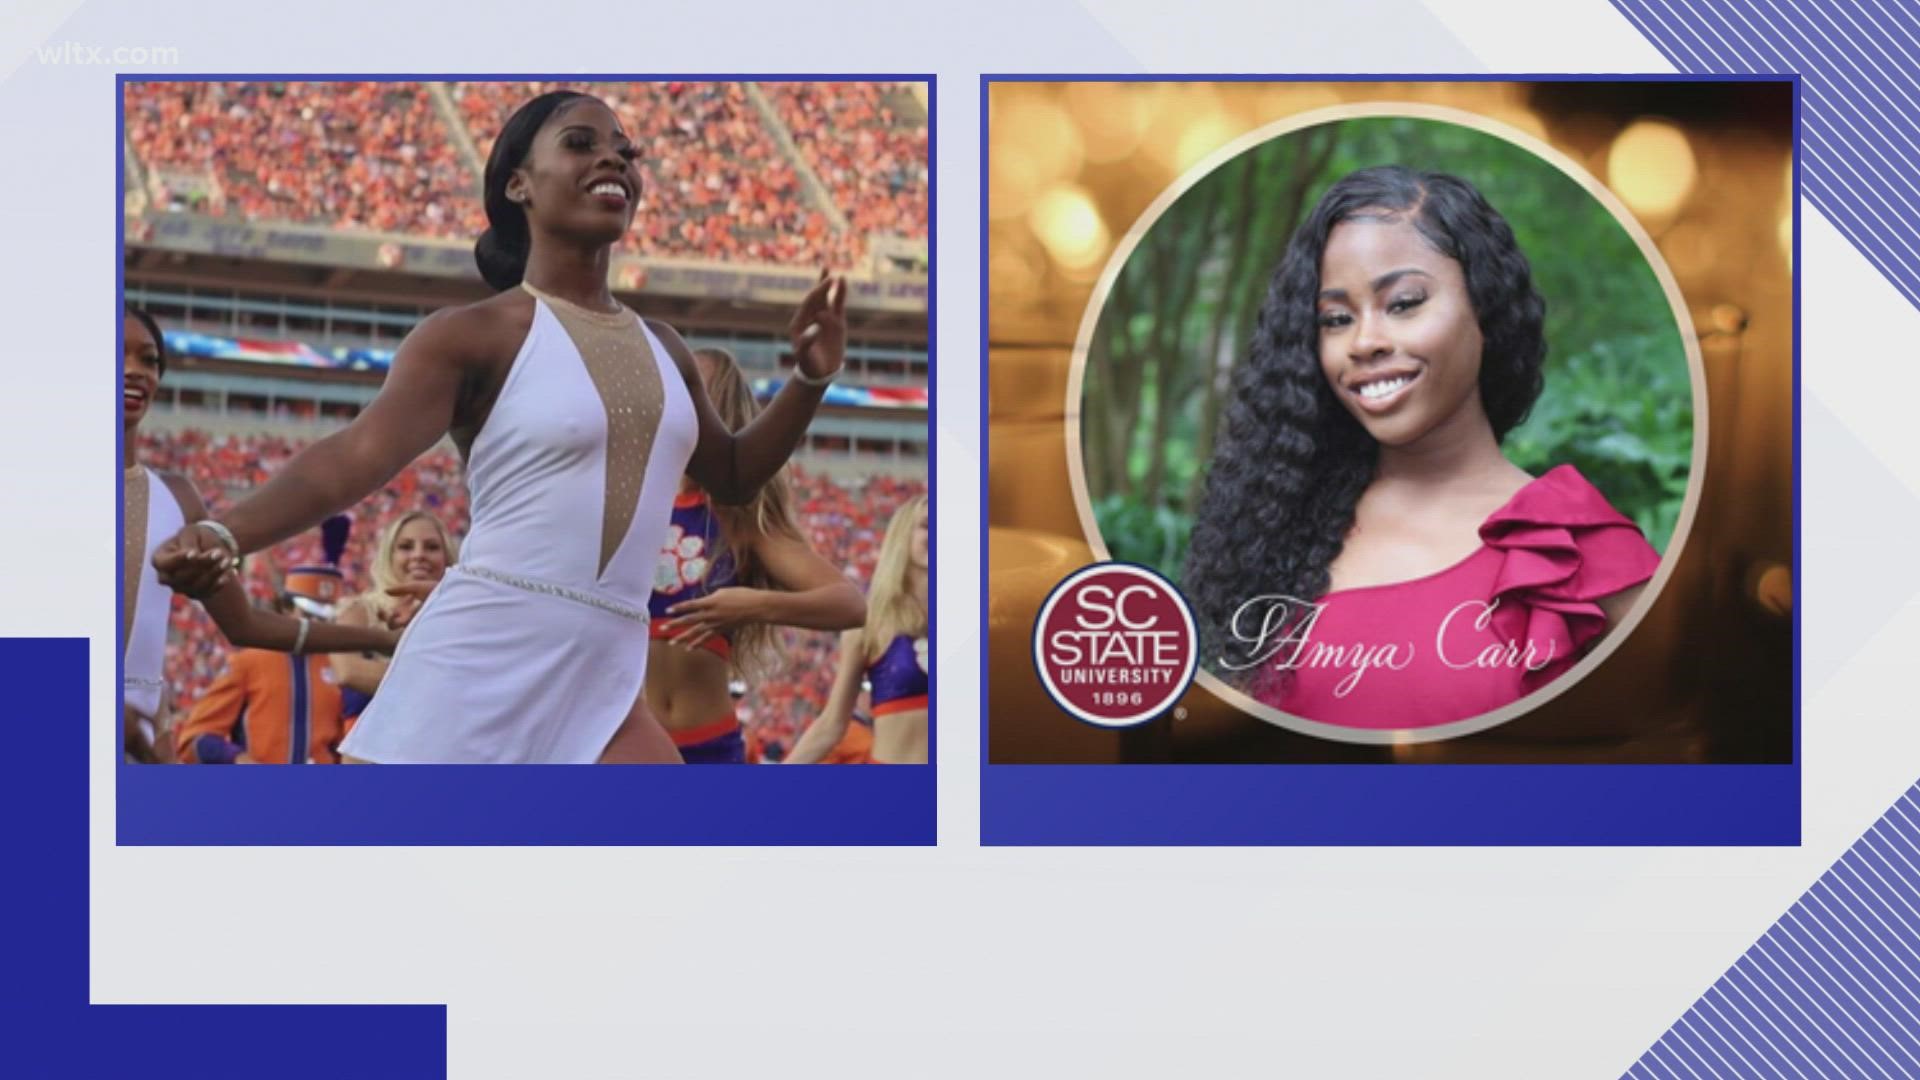 According to SC State University, Amya Carr was majoring in communications and also a member of South Carolina State's dance team, the Champagne Dancers.